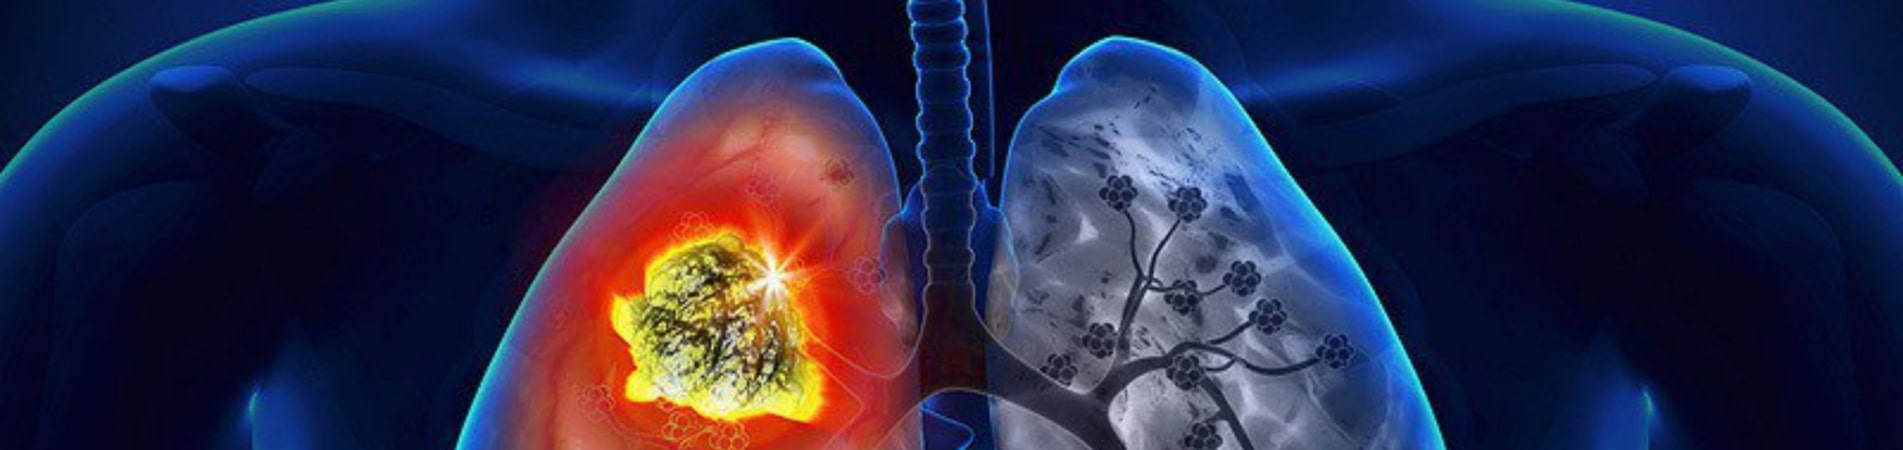 Lung Cancer - Symptoms, Causes, Prevention, And Treatments